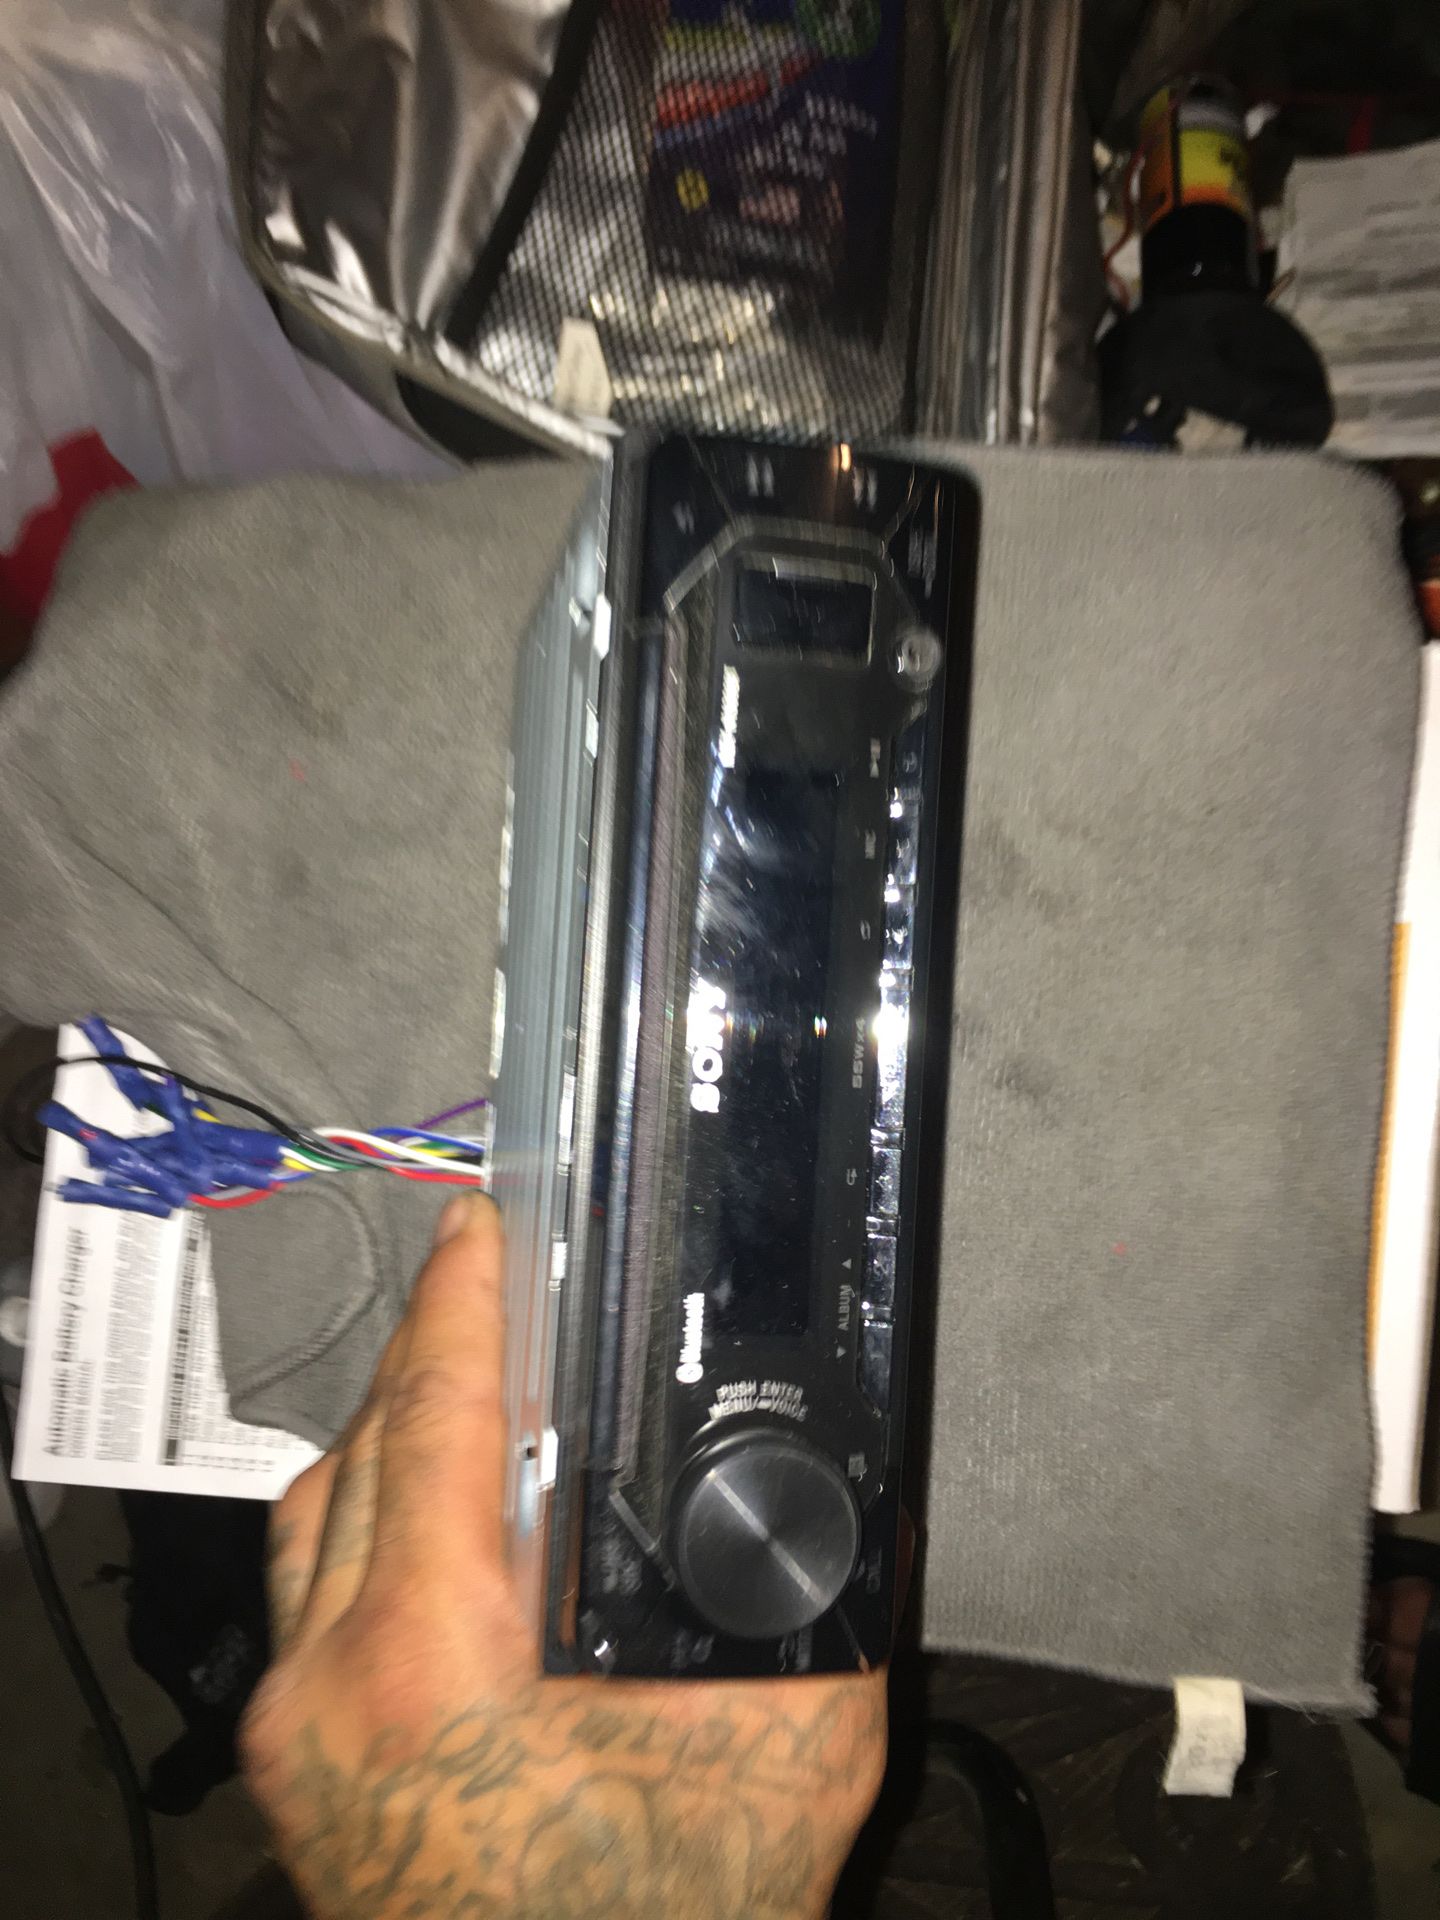 Sony cd blue tooth car audio. Stereo w/ remote control. Paid 106.00 out the door,have the receipt asking 60.00